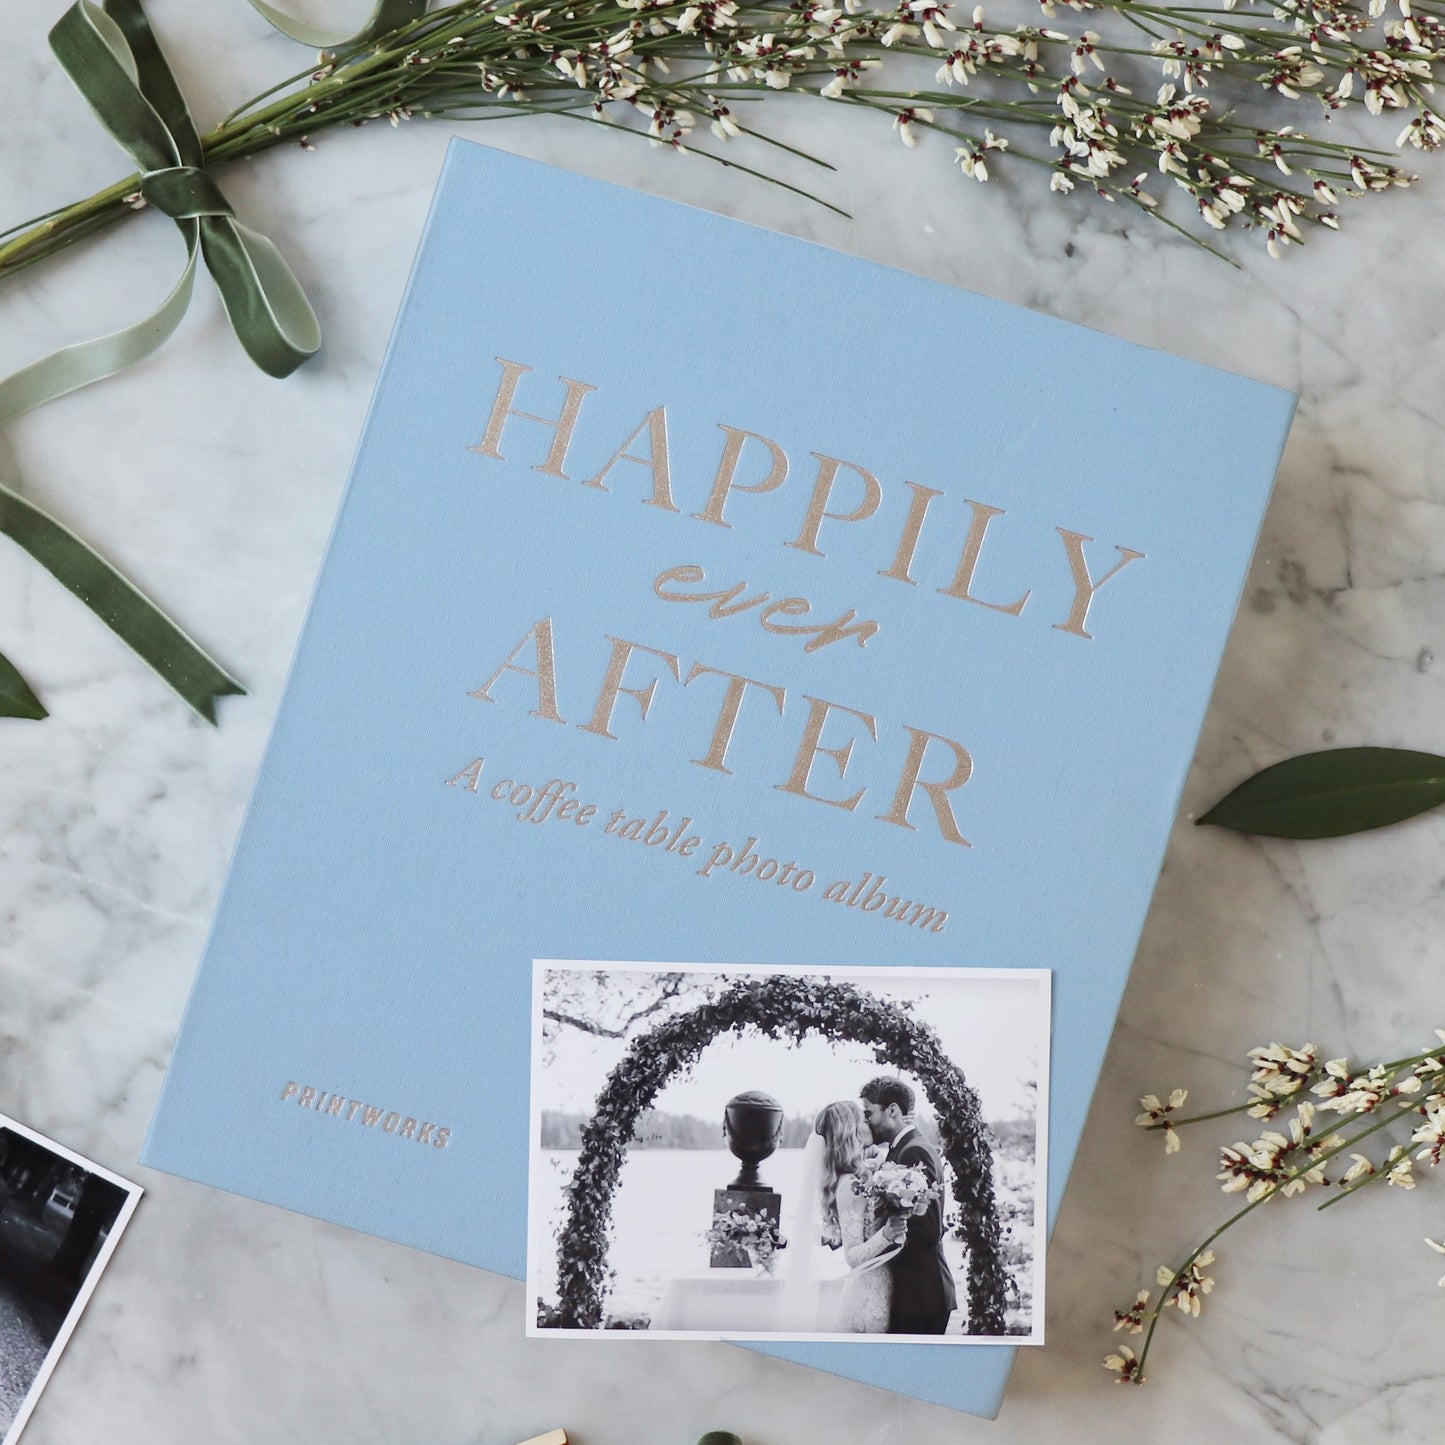 Fotoalbum Happily ever after